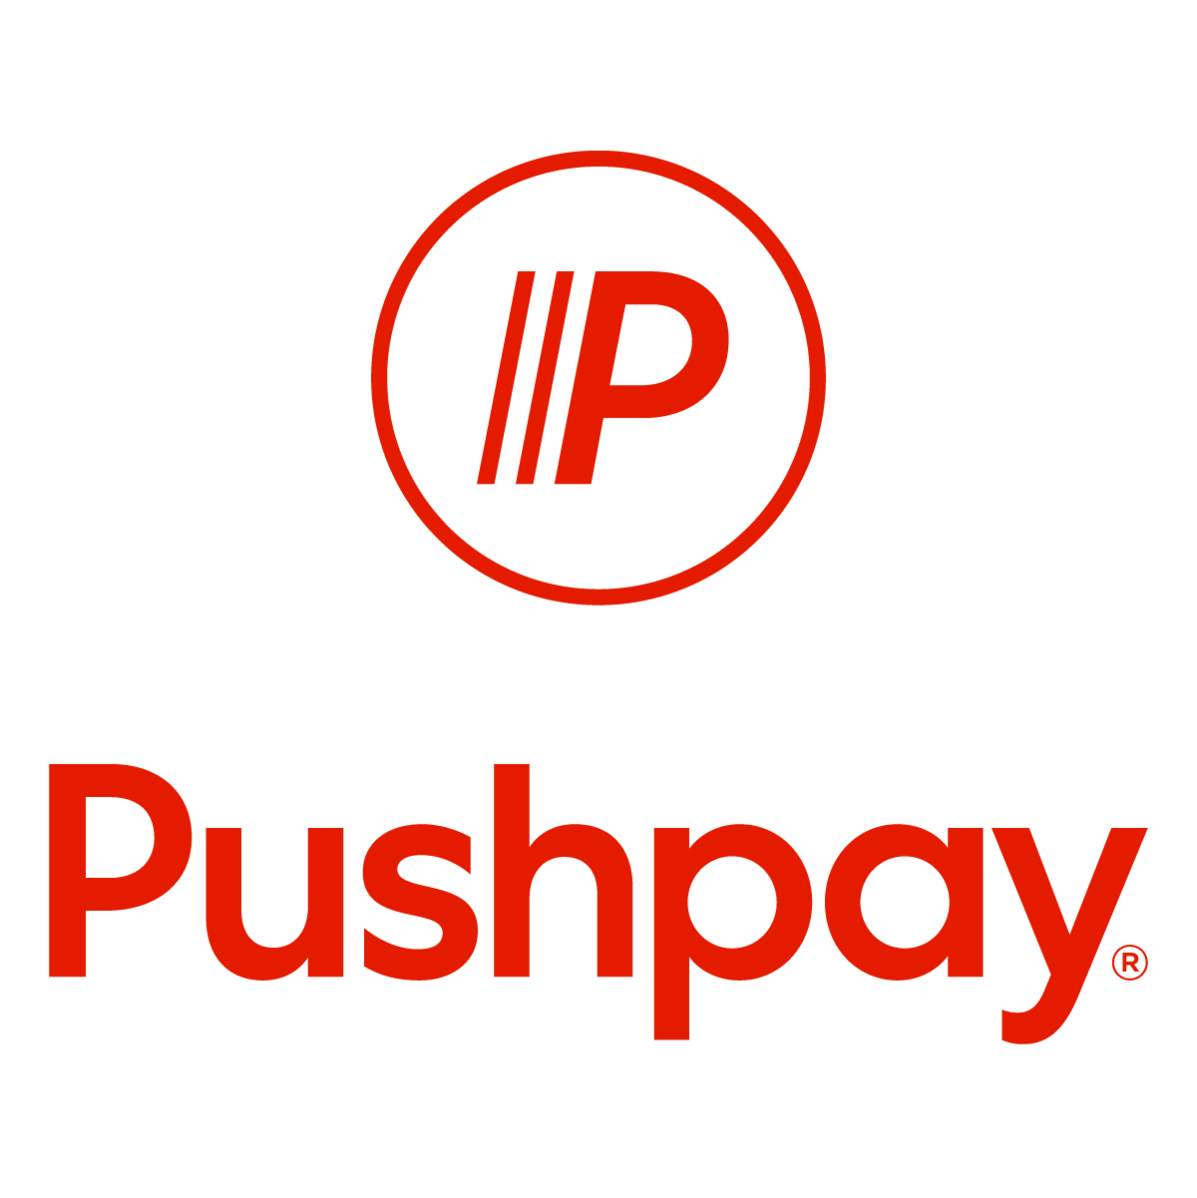 Pushpay_logo_Red_RGB_Wordmark_Stacked.png